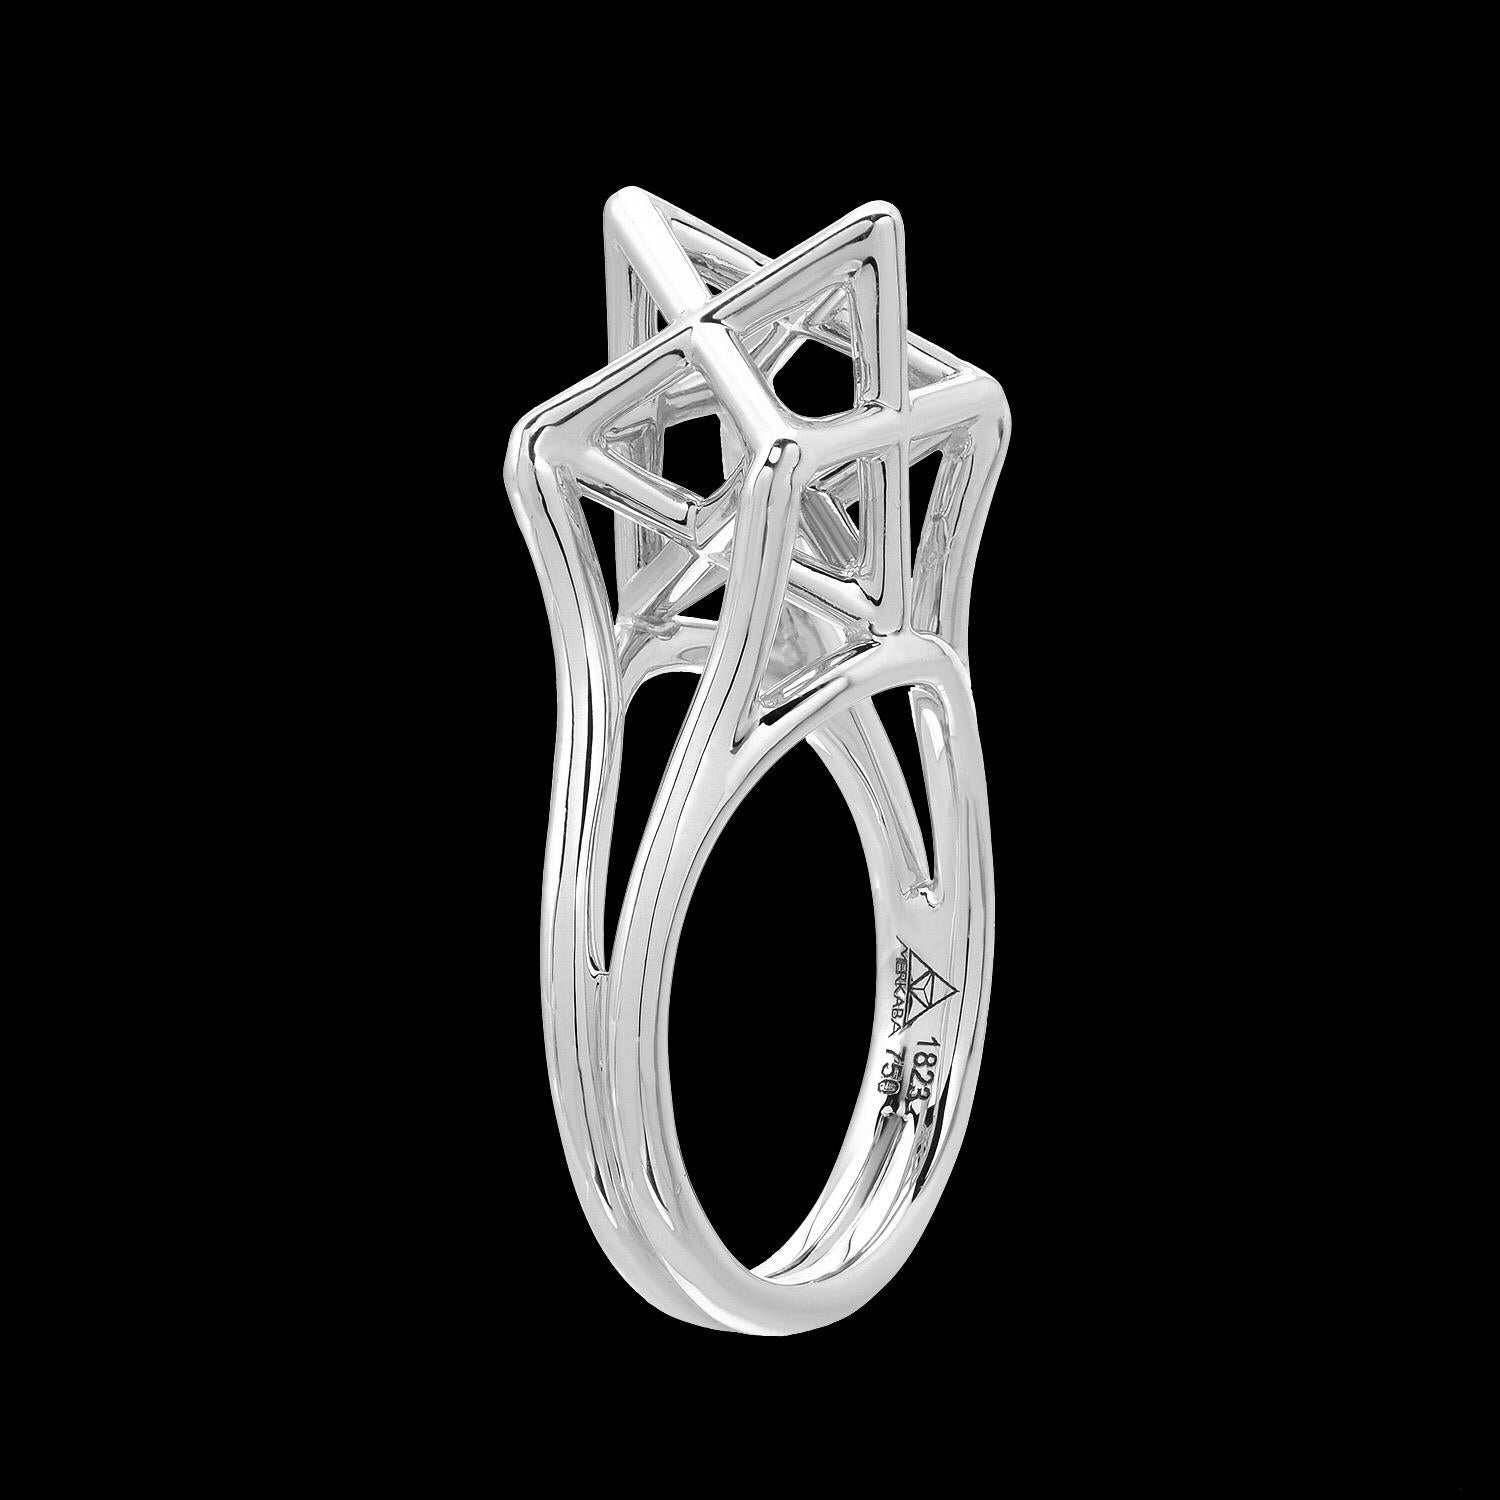 Platinum Ring - Merkaba star tetrahedron platinum ring, featuring a dramatic, sculptural design, extending upward from the hand 0.43”, a stunning three dimensional symbol of universal light. 
Size 6. Resizing is complimentary upon request.
Crafted